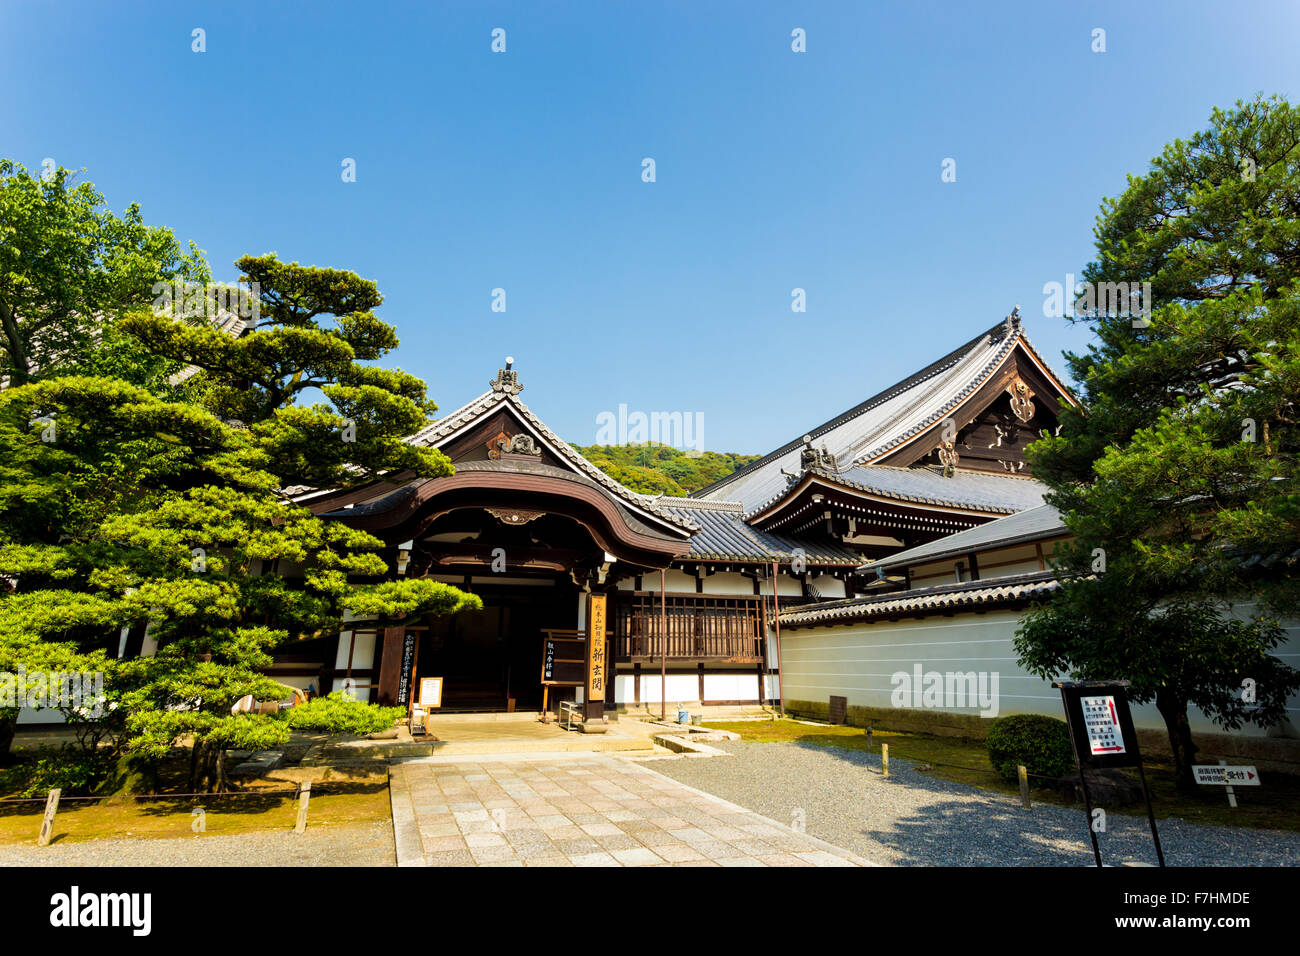 Beautiful Japanese wooden structure, side entrance to Chion-In Buddhist Temple and stone path during daytime in Kyoto, Japan Stock Photo